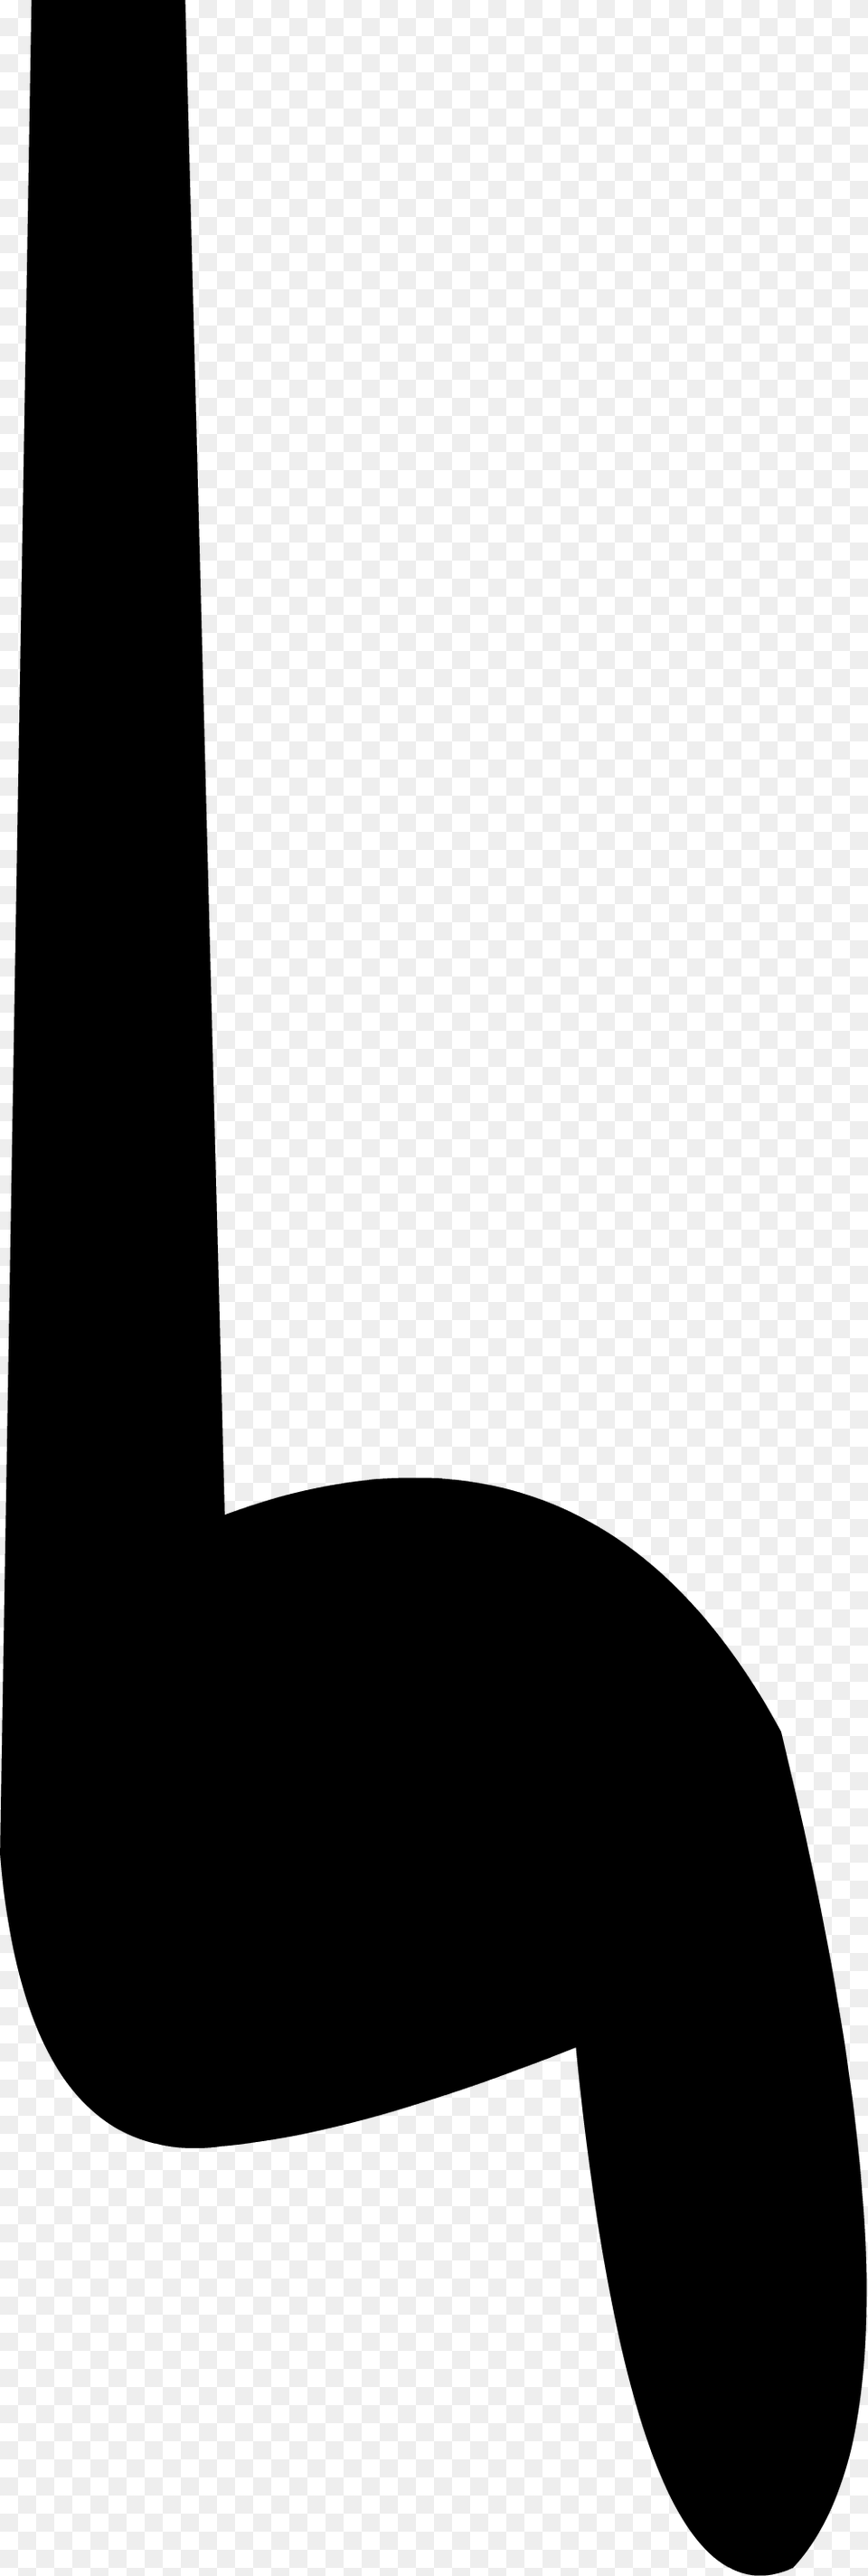 Ugly Point Finger Arm Bfdi Pointing Arm Assets, Gray Png